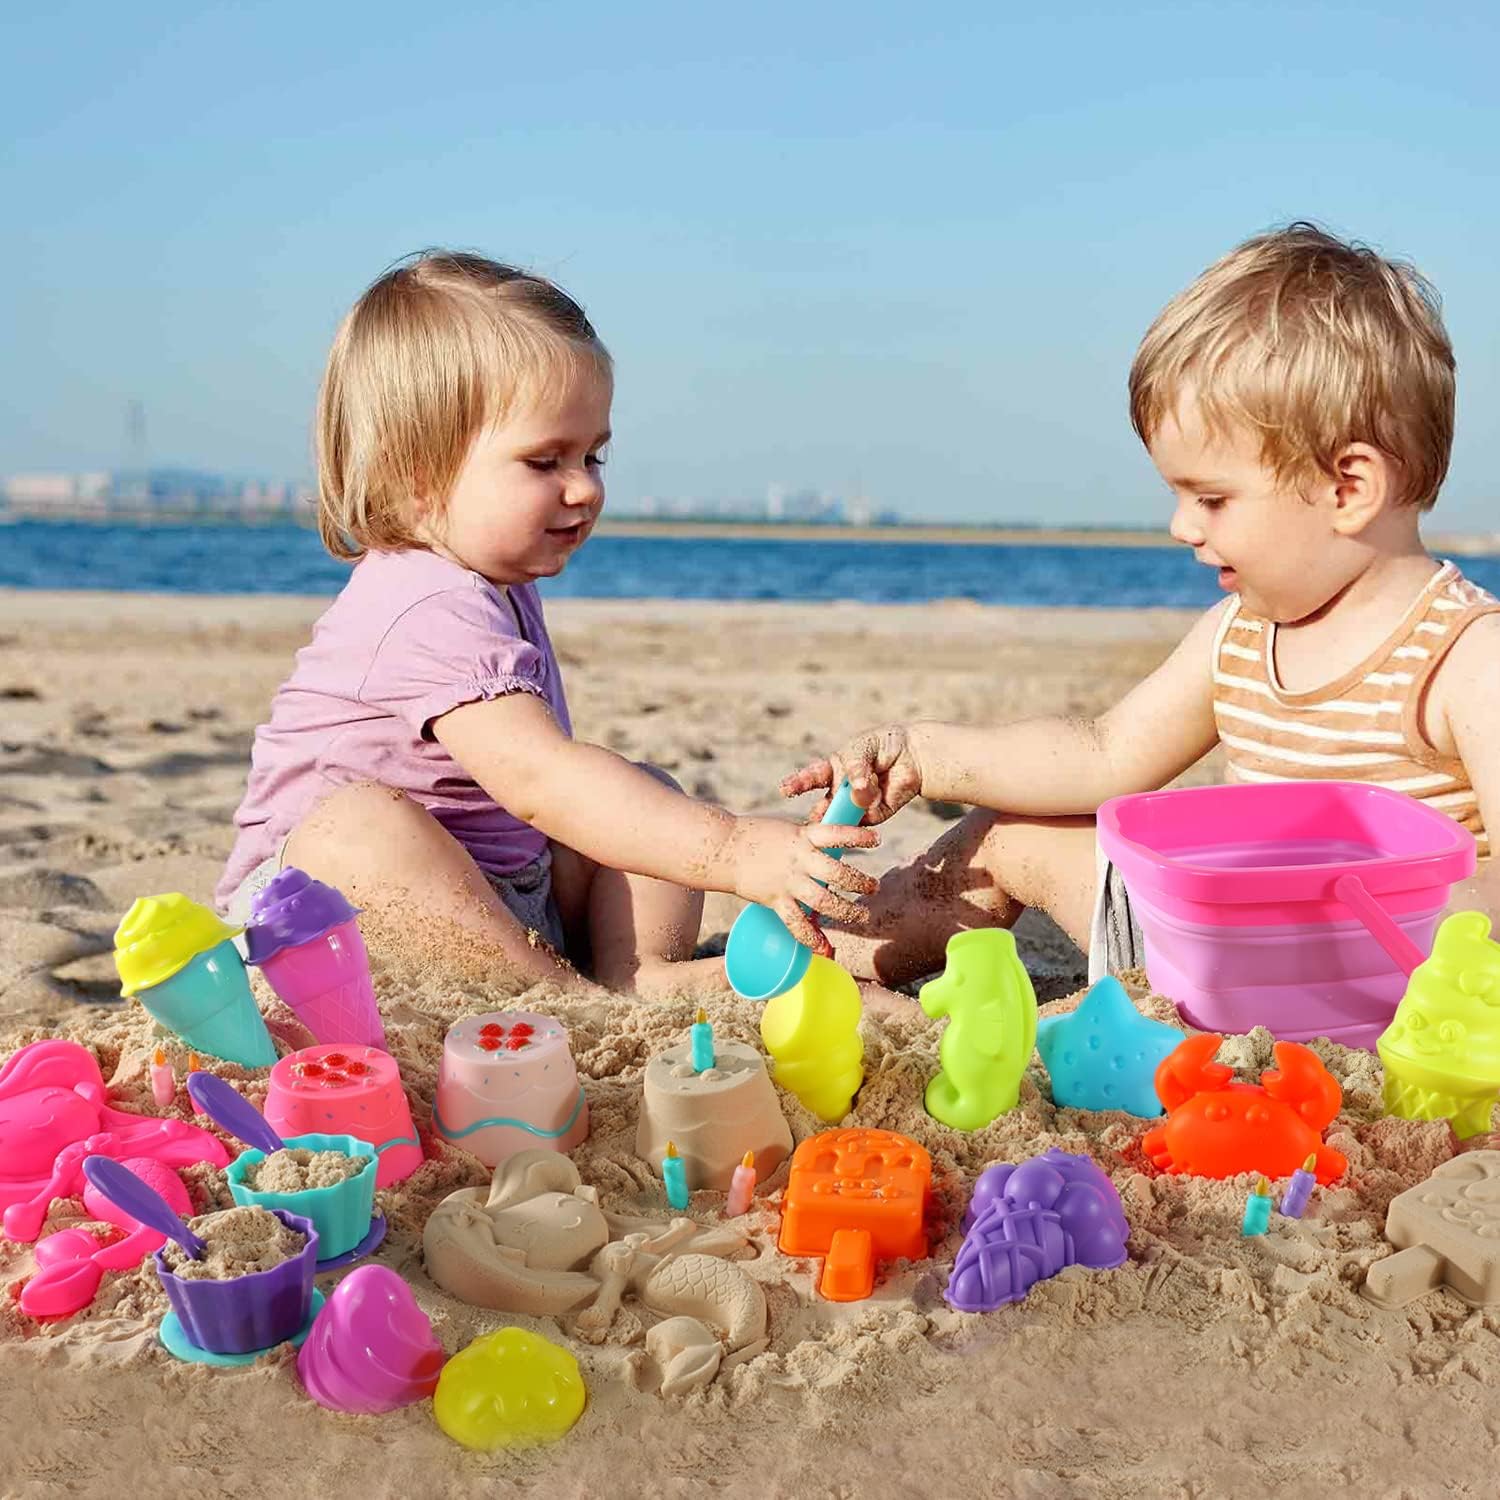 TOY Life Beach Toys Sand Toys for Kids 3-10, 41 Pcs Travel Mermaid Beach Sand Toys for Toddlers 1 3 Girls Collapsible Beach Bucket and Shovels, Ice Cream Sand Molds Toys Mesh Bag Toddler Sandbox Toys